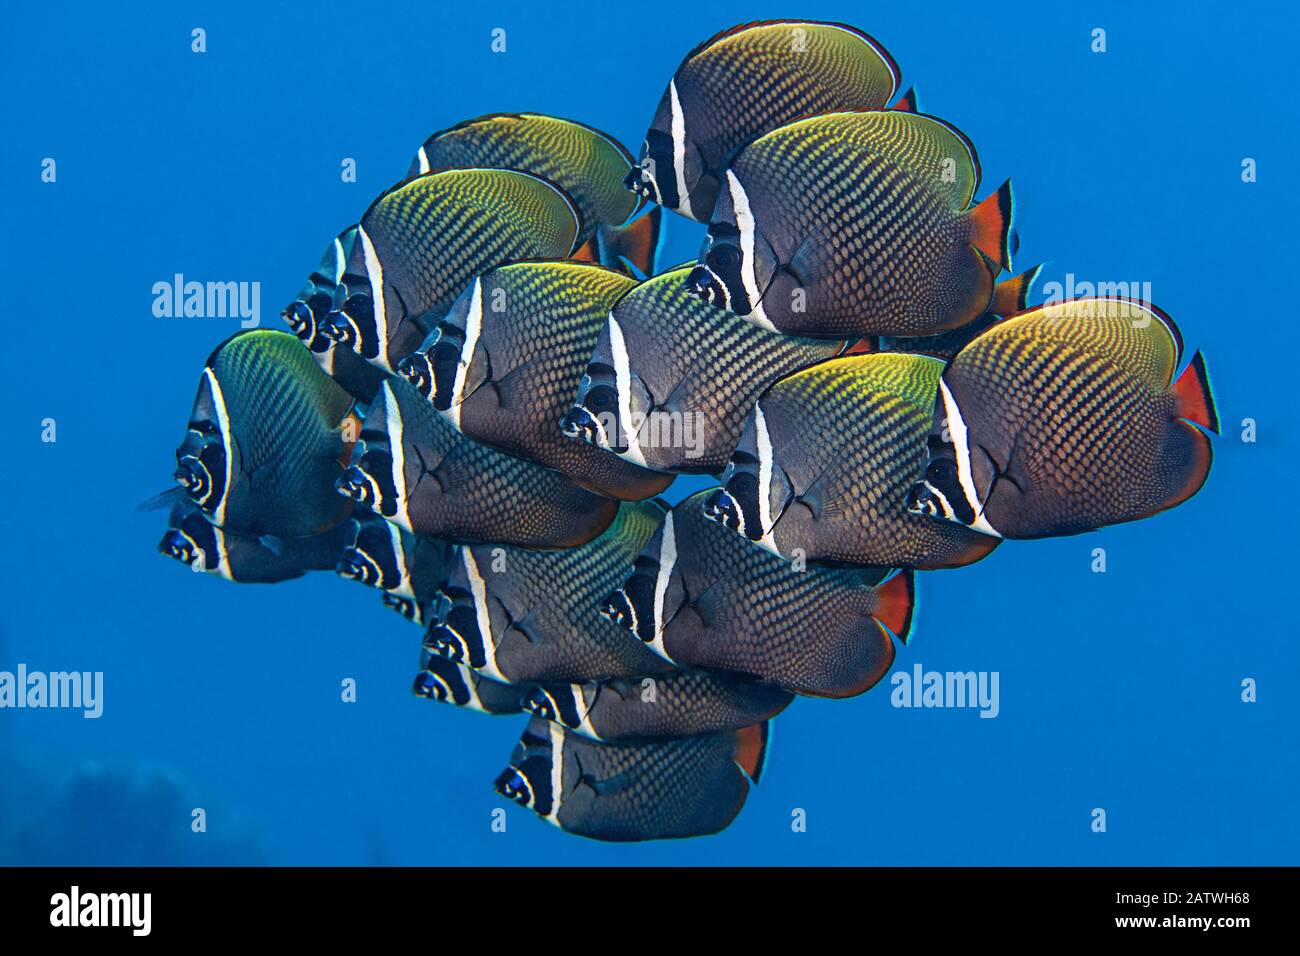 School of White collar butterflyfish (Chaetodon collare) pack together above a coral reef. North Male Atoll, Maldives. Indian Ocean Stock Photo